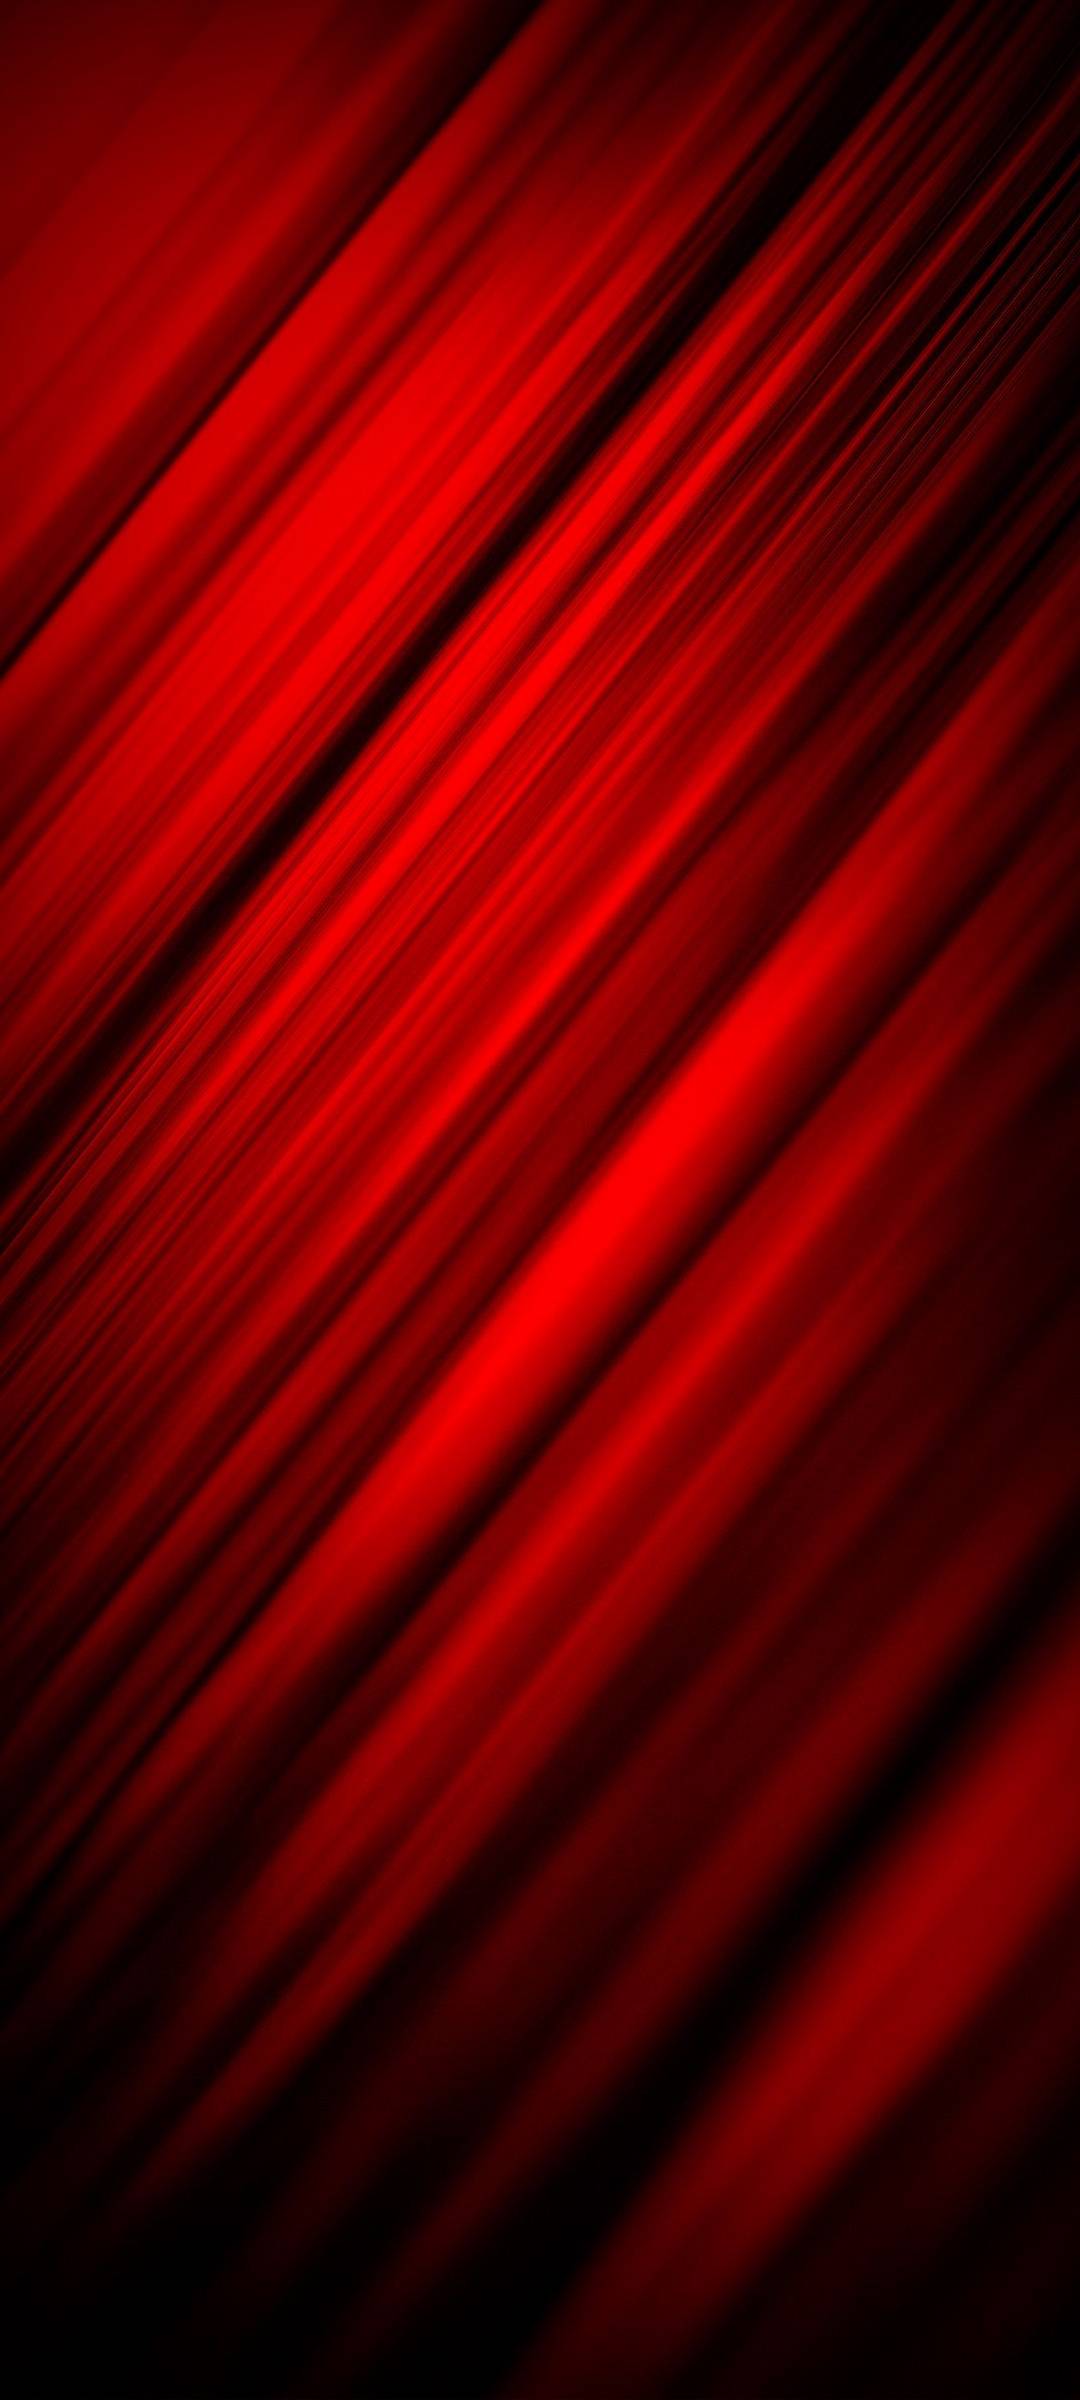 Phone wallpaper with Digital black and red art design with dark 4k style  5843167 Vector Art at Vecteezy